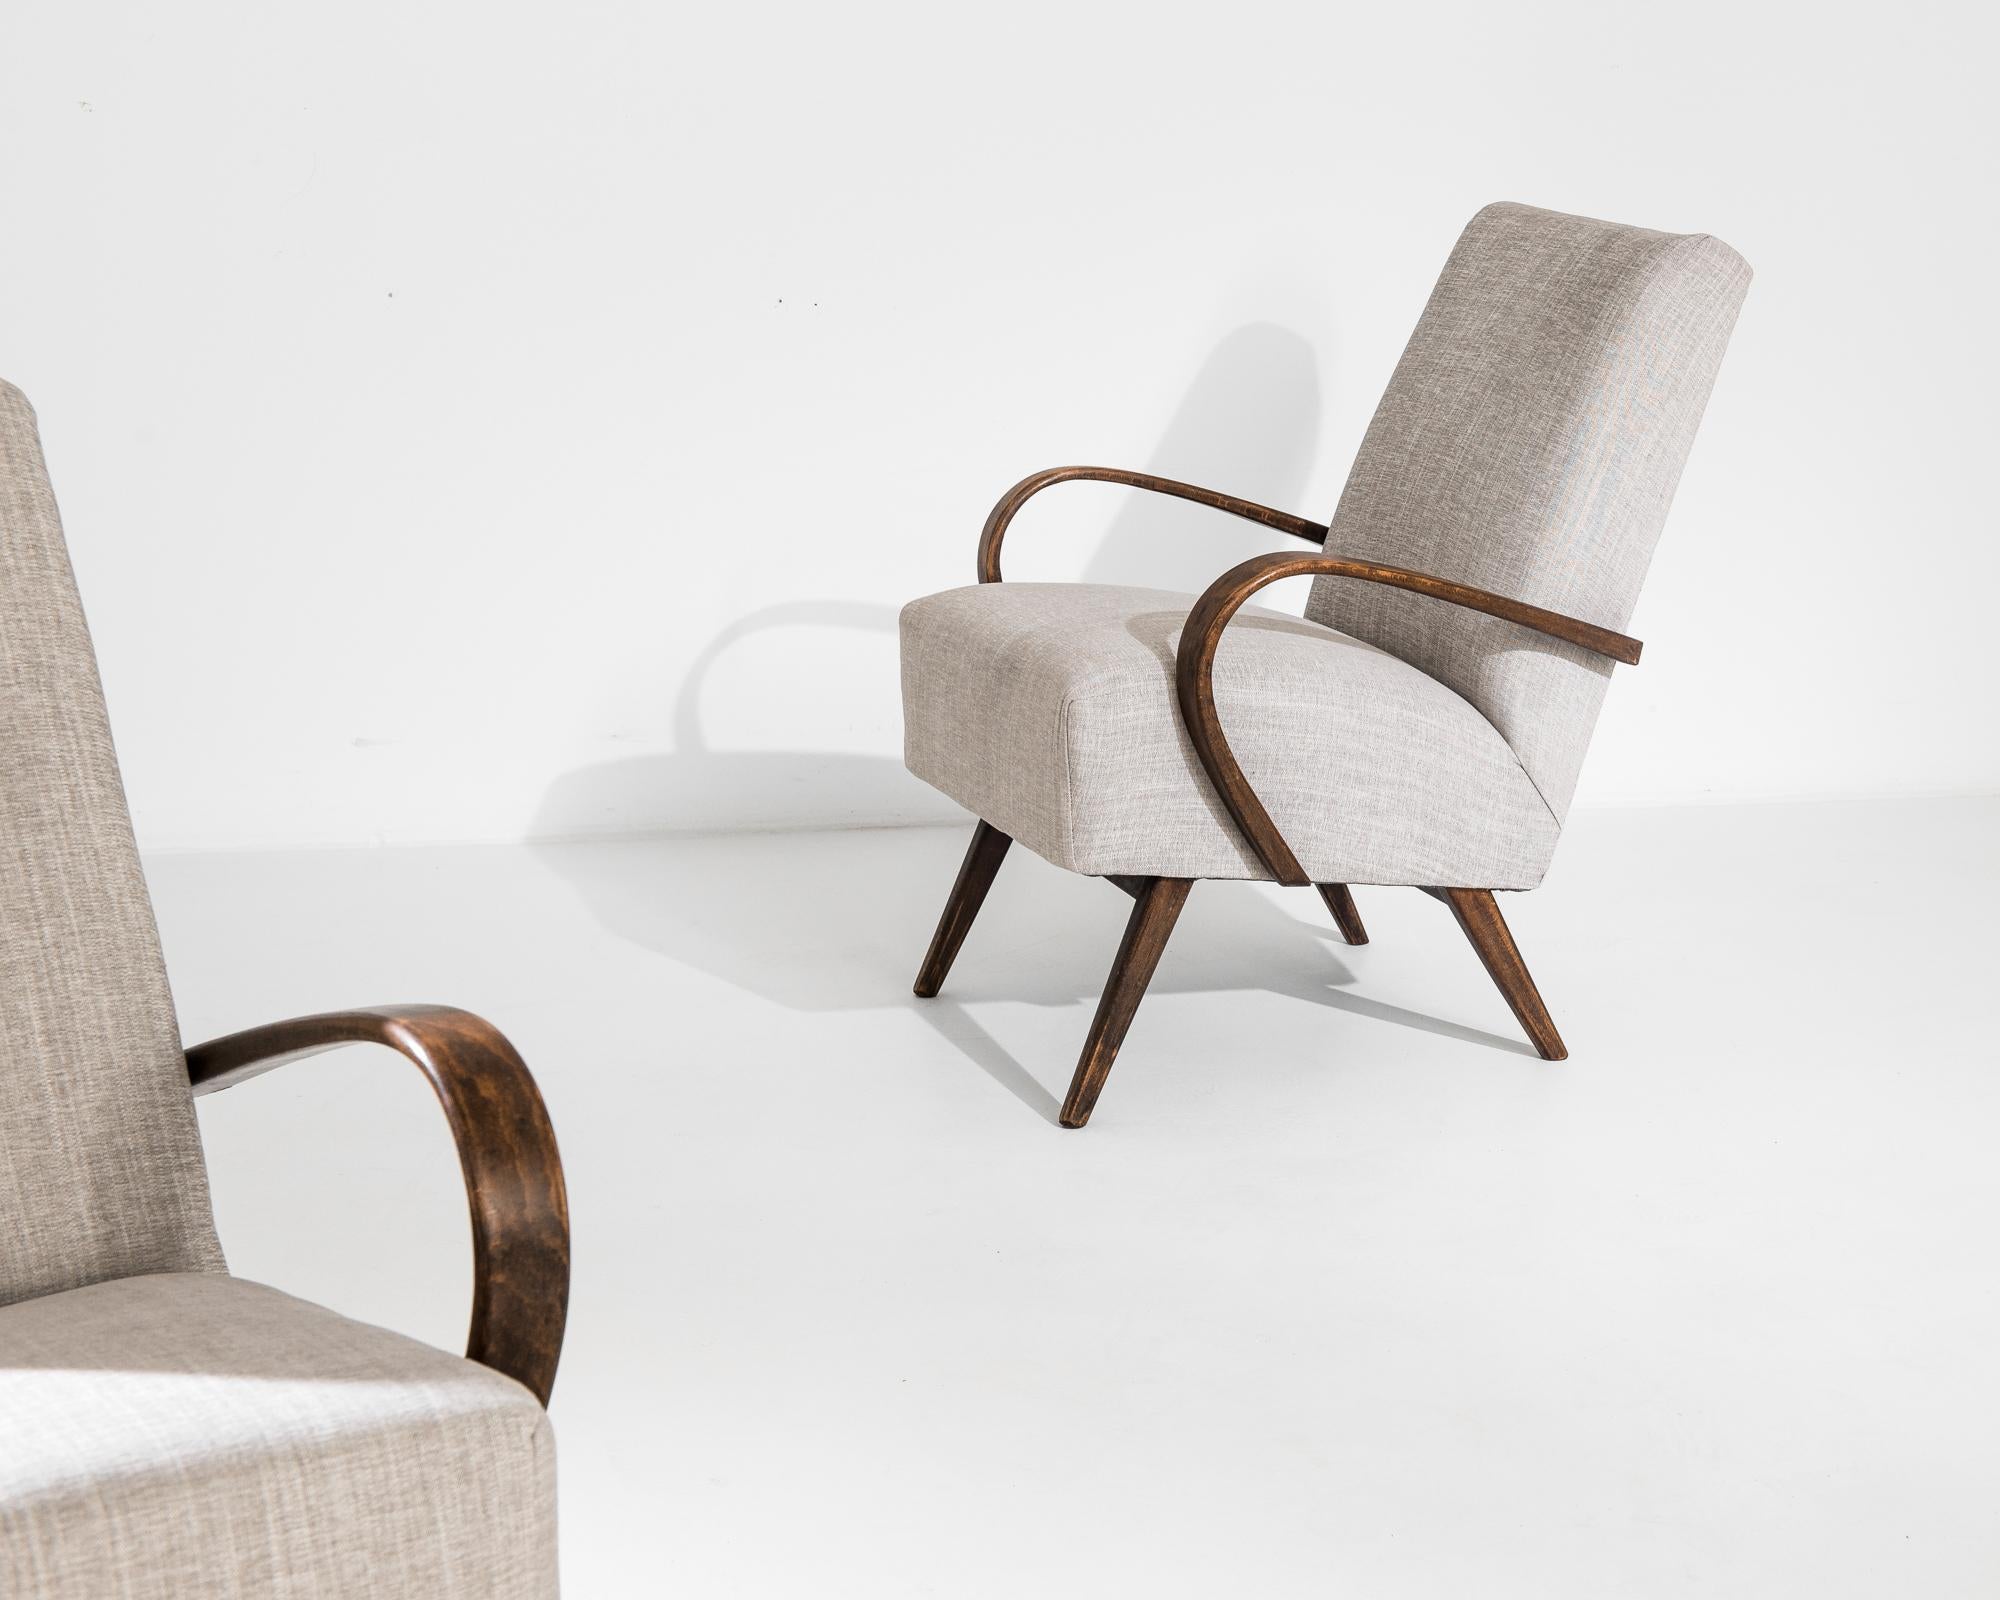 A pair of armchairs by Czech furniture designer Jindrich Halabala. This 1950s design is upholstered in an updated ecru fabric, the soothing earth tone was chosen to compliment the natural brown of the hardwood frame. Influenced by Modern and Art